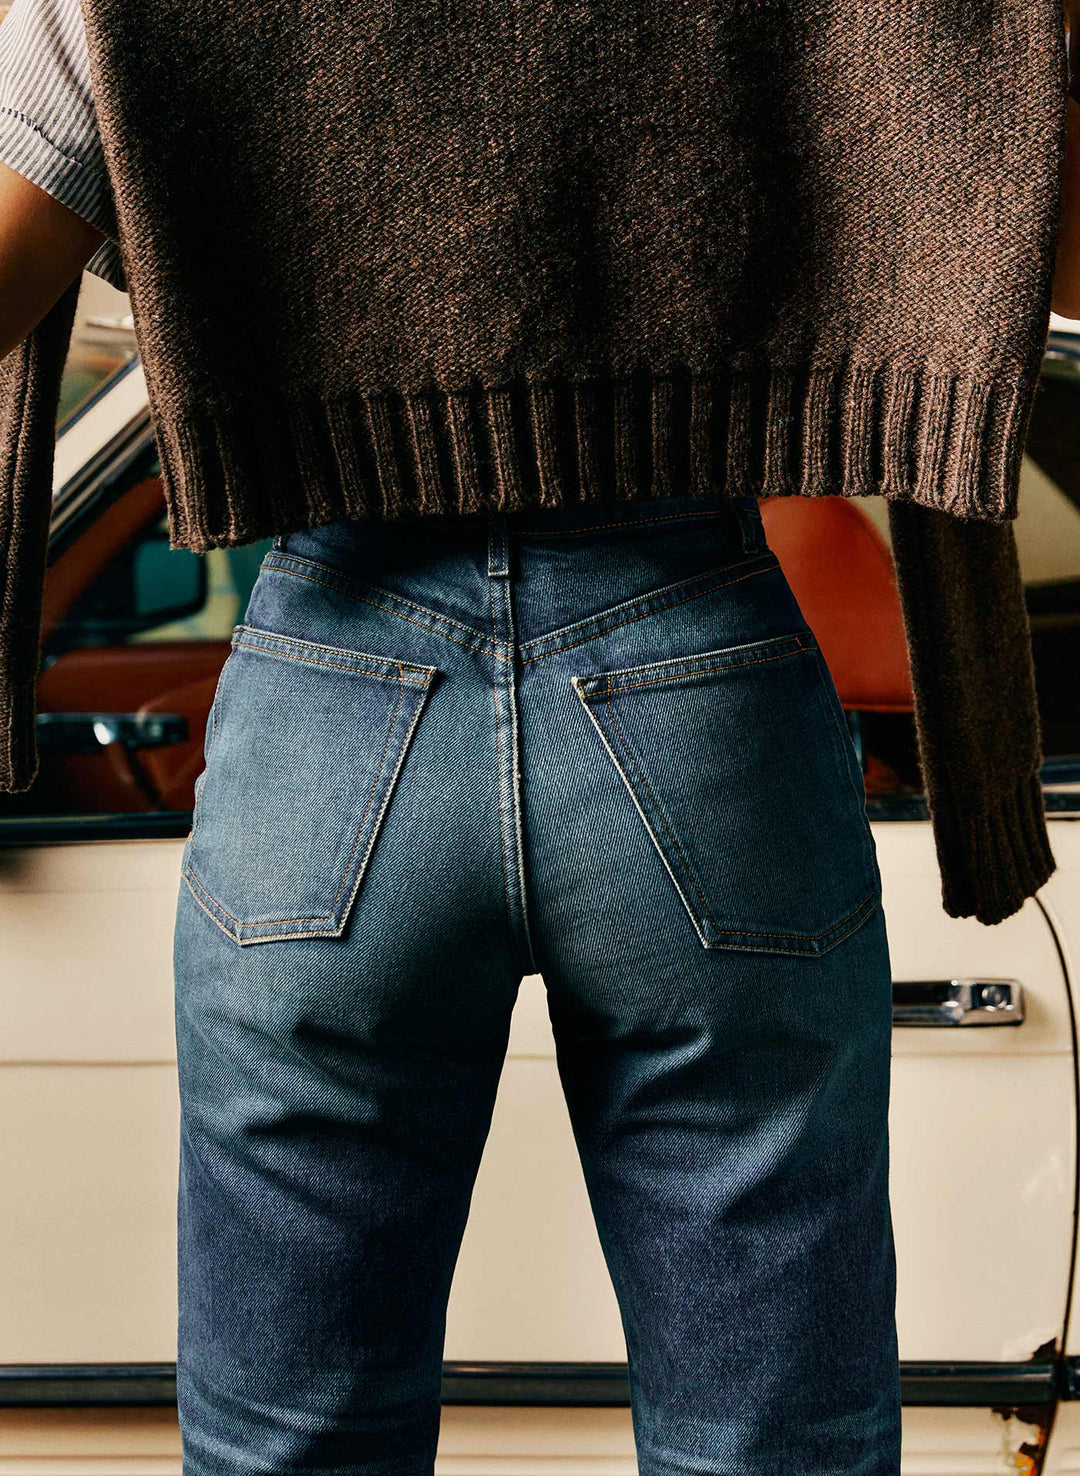 a person wearing jeans and a sweater